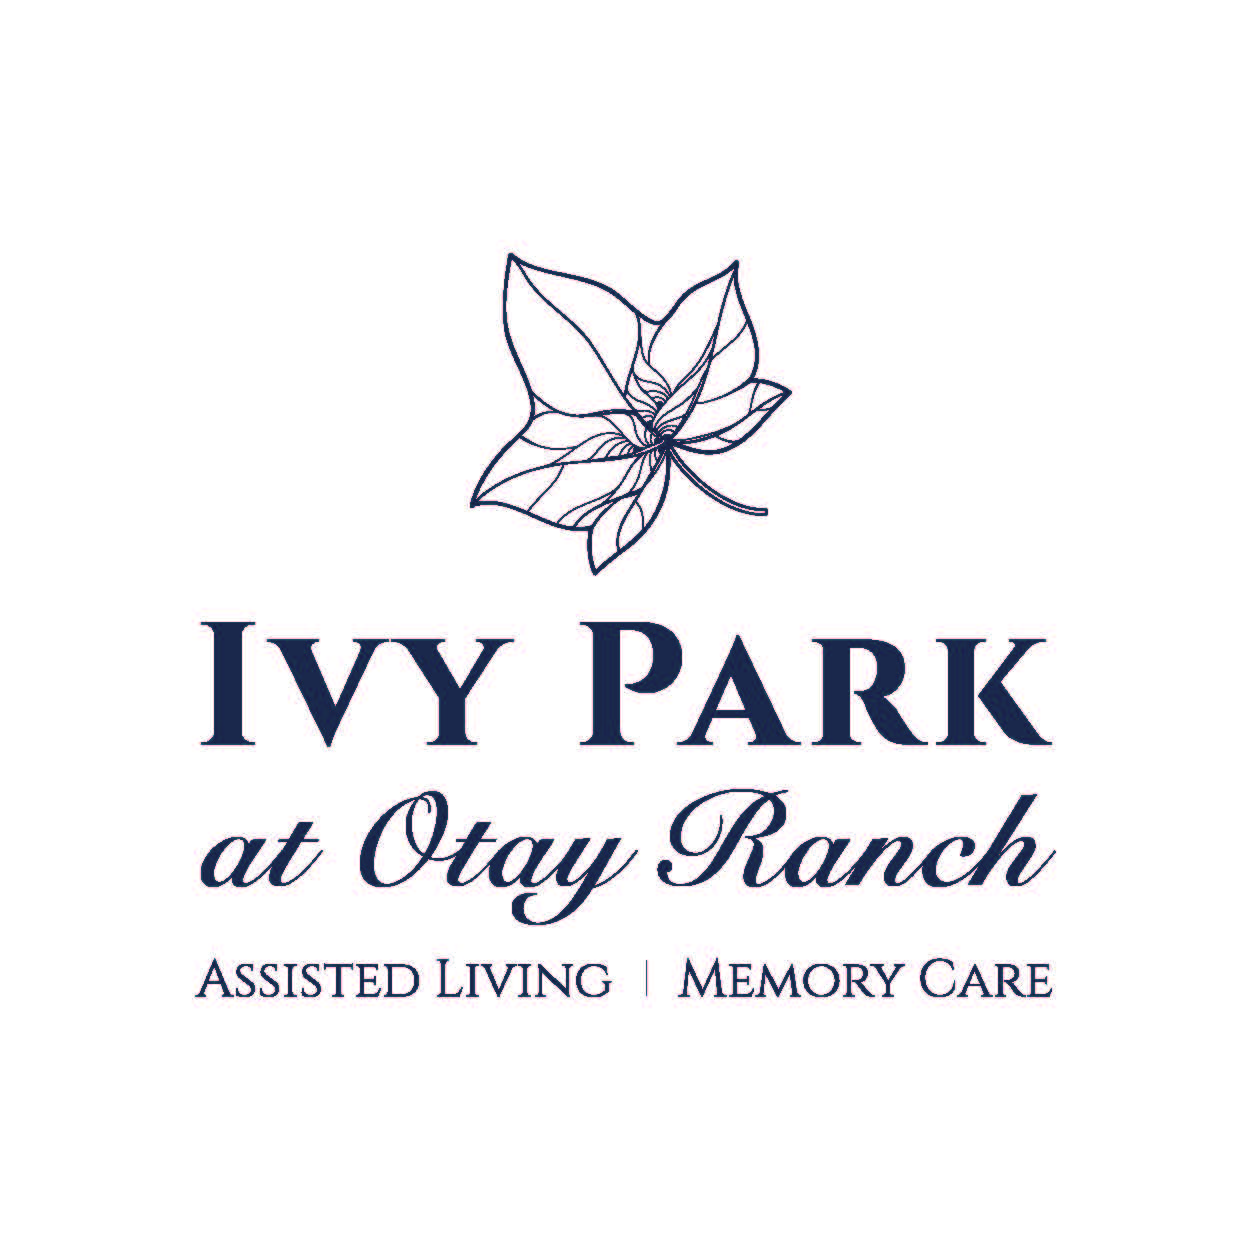 Ivy Park of Otay Ranch (Tier 4)